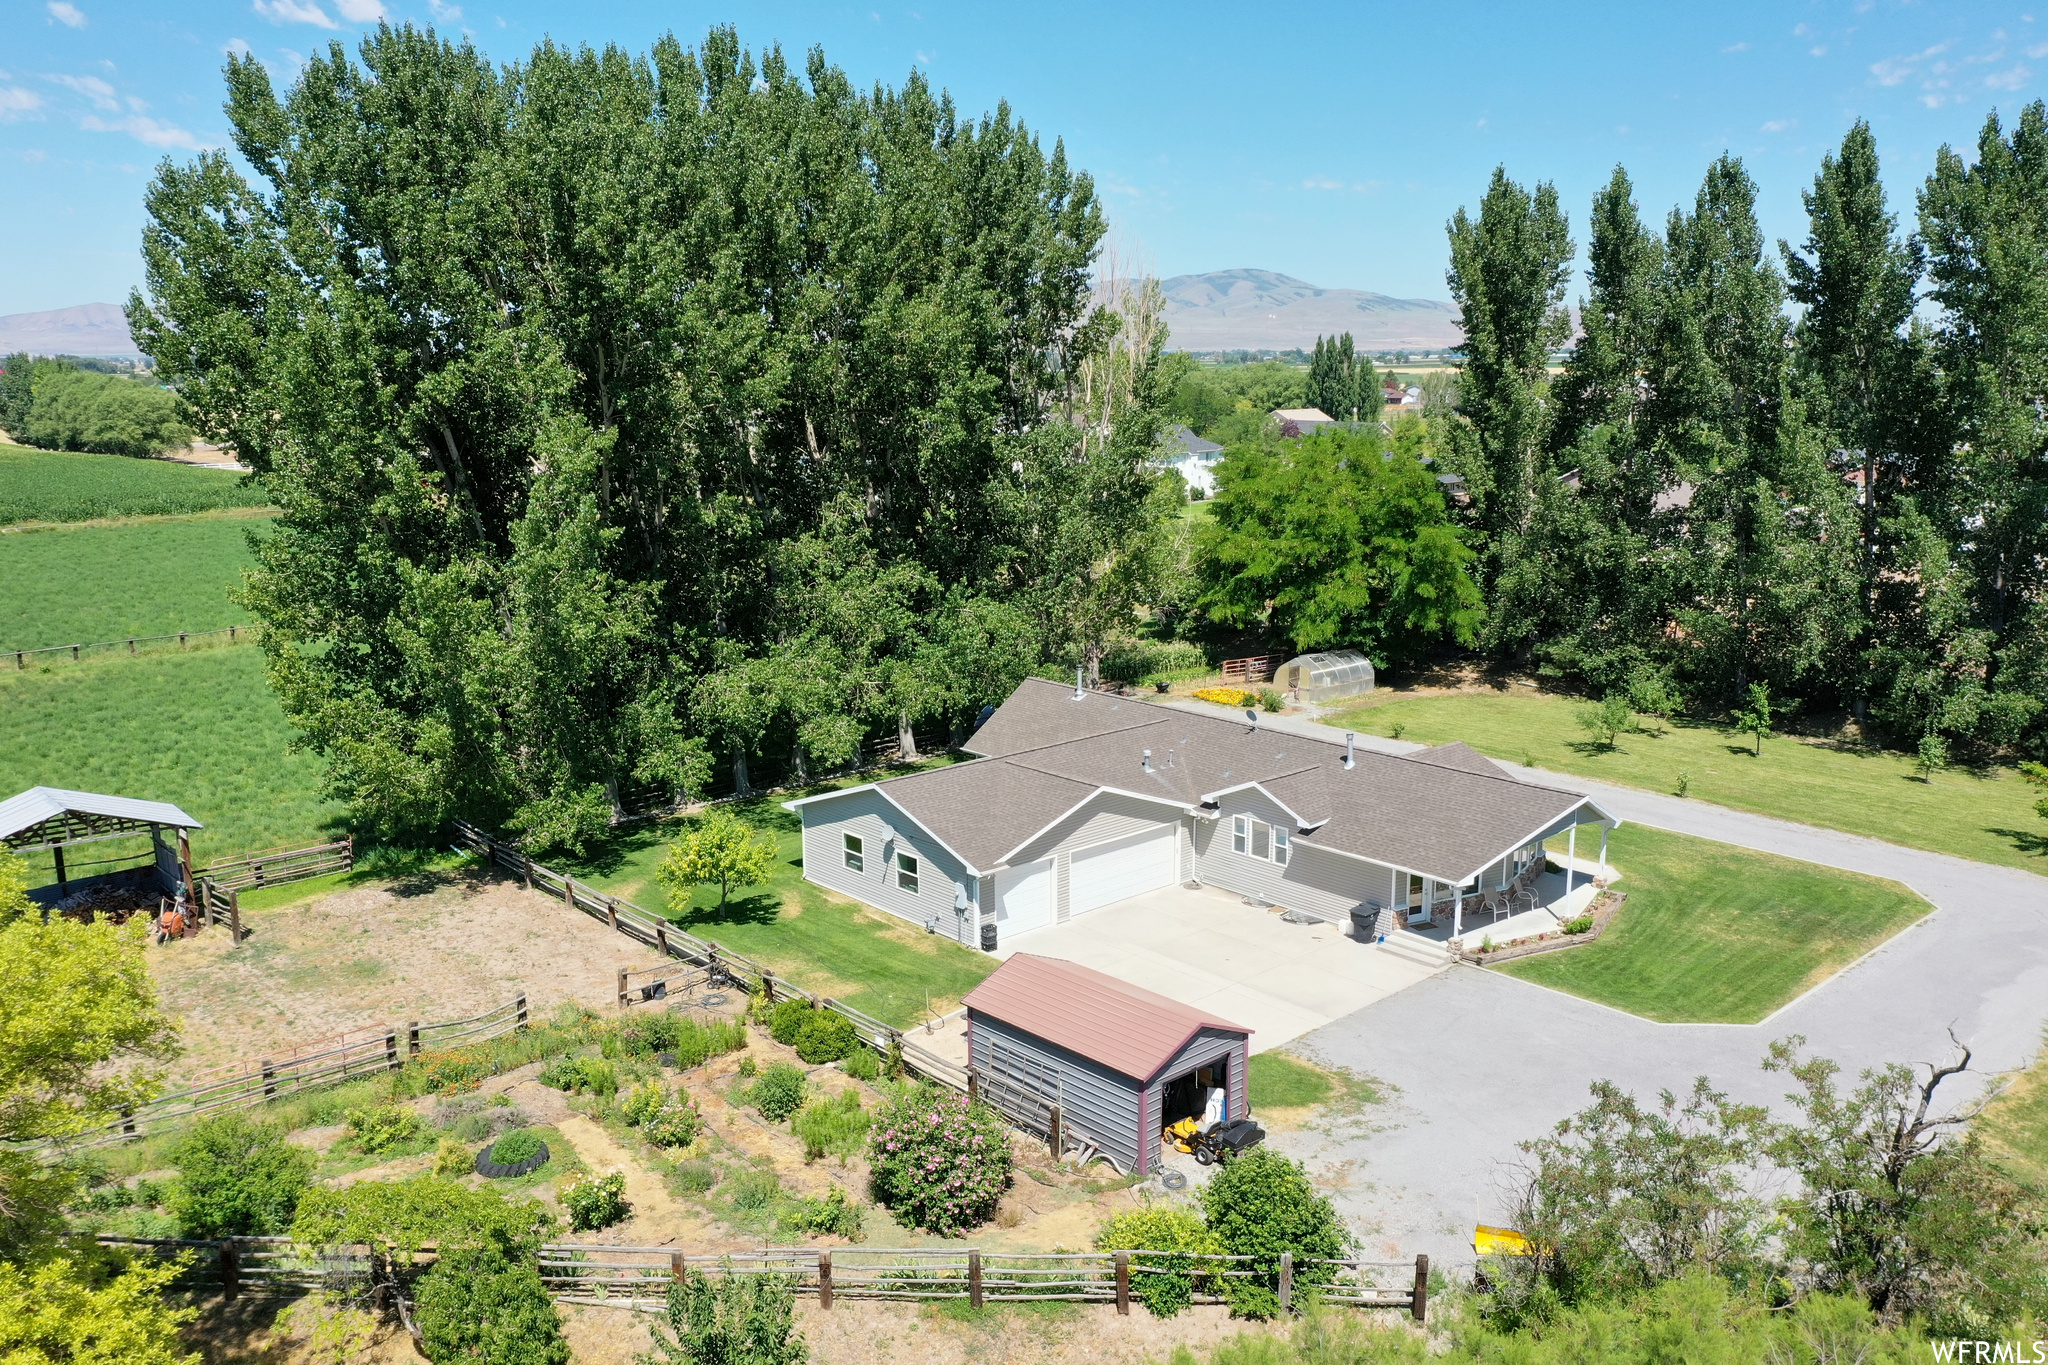 View of property featuring custom home, corrals, pasture, mature landscaping and hay field behind the house.